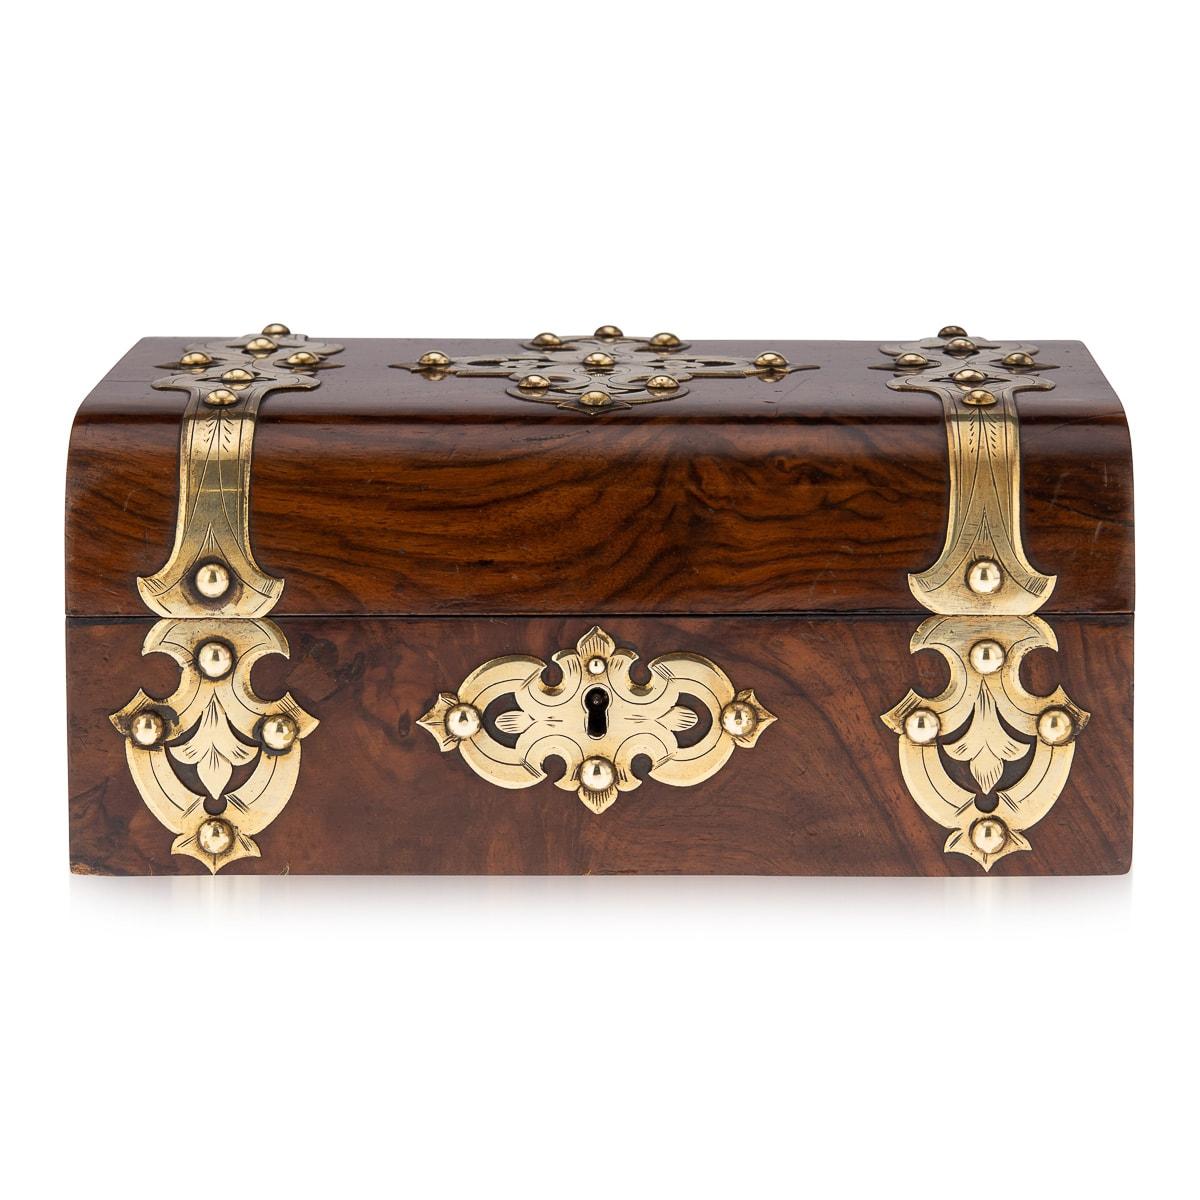 A superb antique Victorian burr walnut casket or jewellery box with elaborate decorative pierced cut brass mounts, circa 1860 in date. The interior is fitted with a lift-out tray and lined in purple velvet, ready to store trinkets or jewellery of